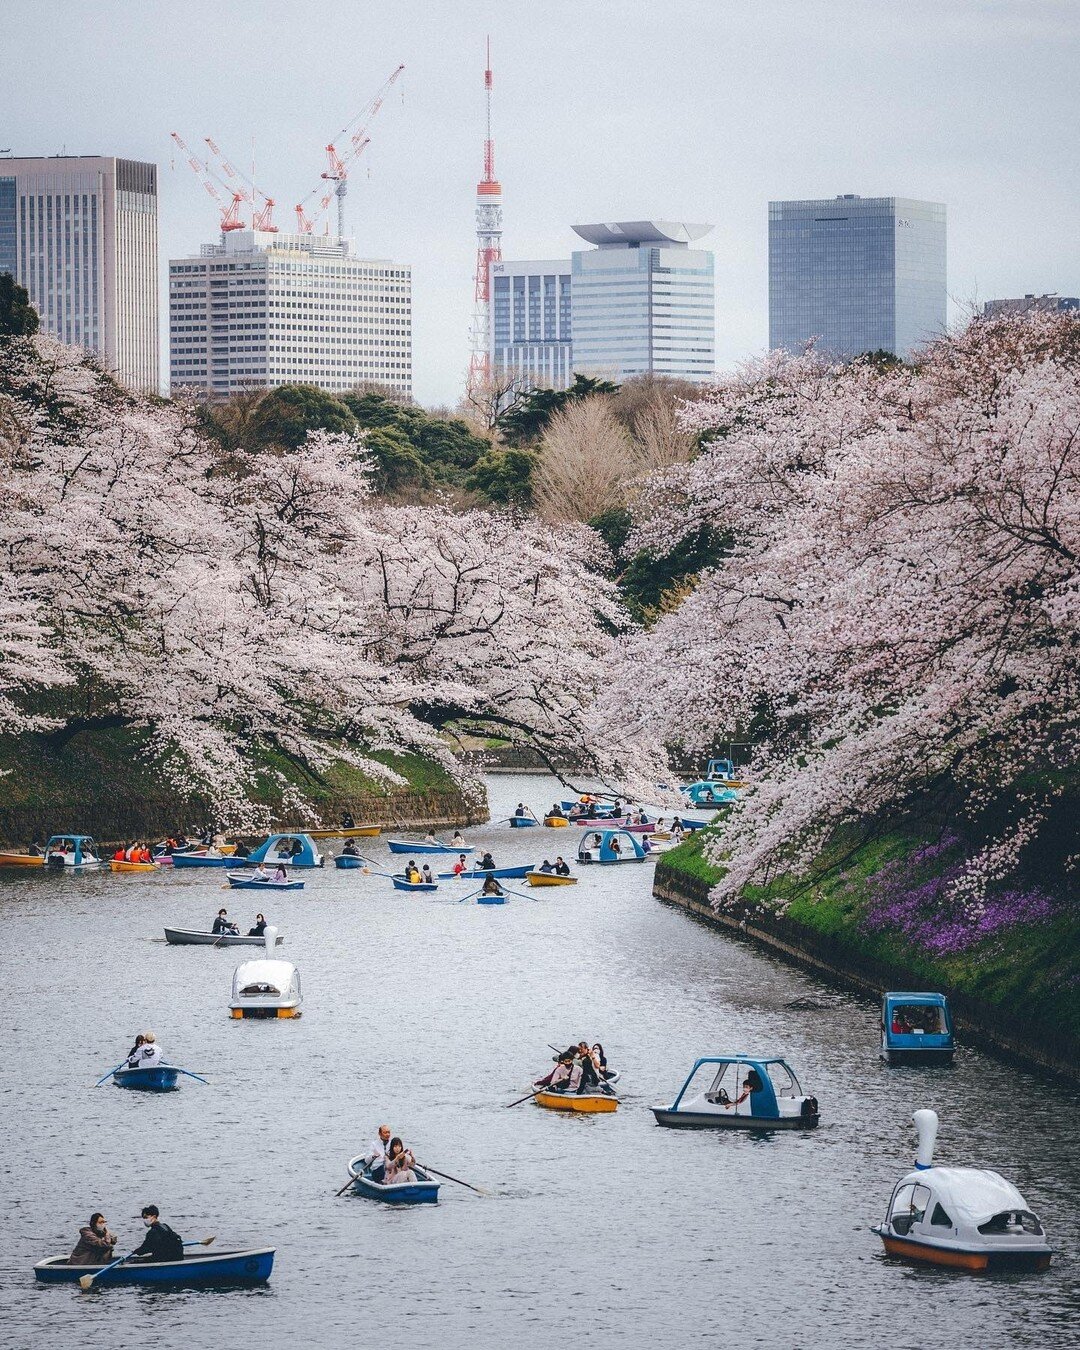 Cherry blossoms are slowly coming to an end 😭. Swipe to see all the popular locations to view cherry blossoms in Tokyo!

🌸 @m.ssaa.k  Chidorigafuchi Imperial Palace
🌸@wangxiaolangman 
🌸@nocchi_24 Seibu Train Line
🌸@nickelpack Shibuya Sakura Dori